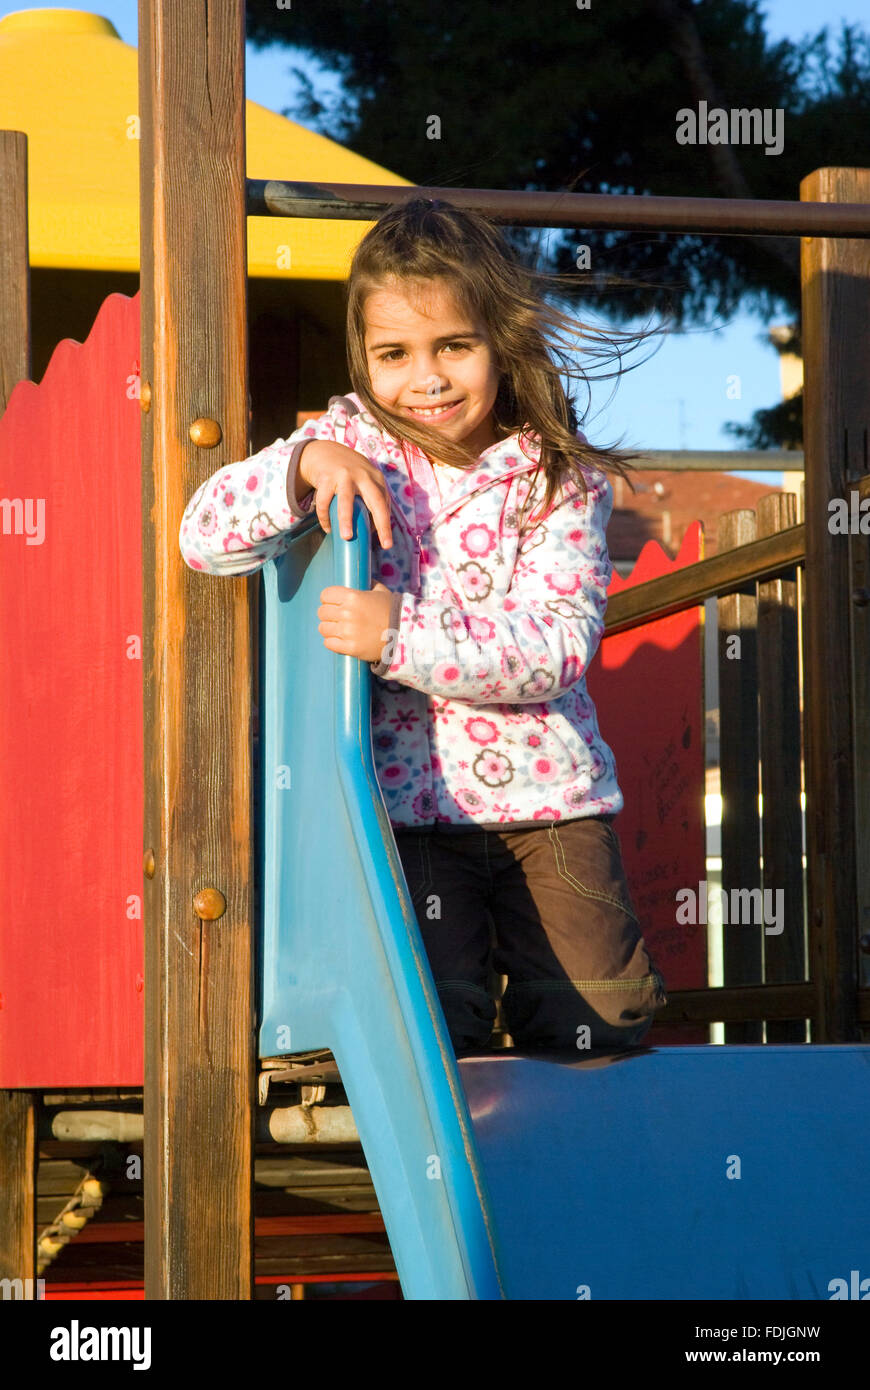 Girl playing at the playground Stock Photo